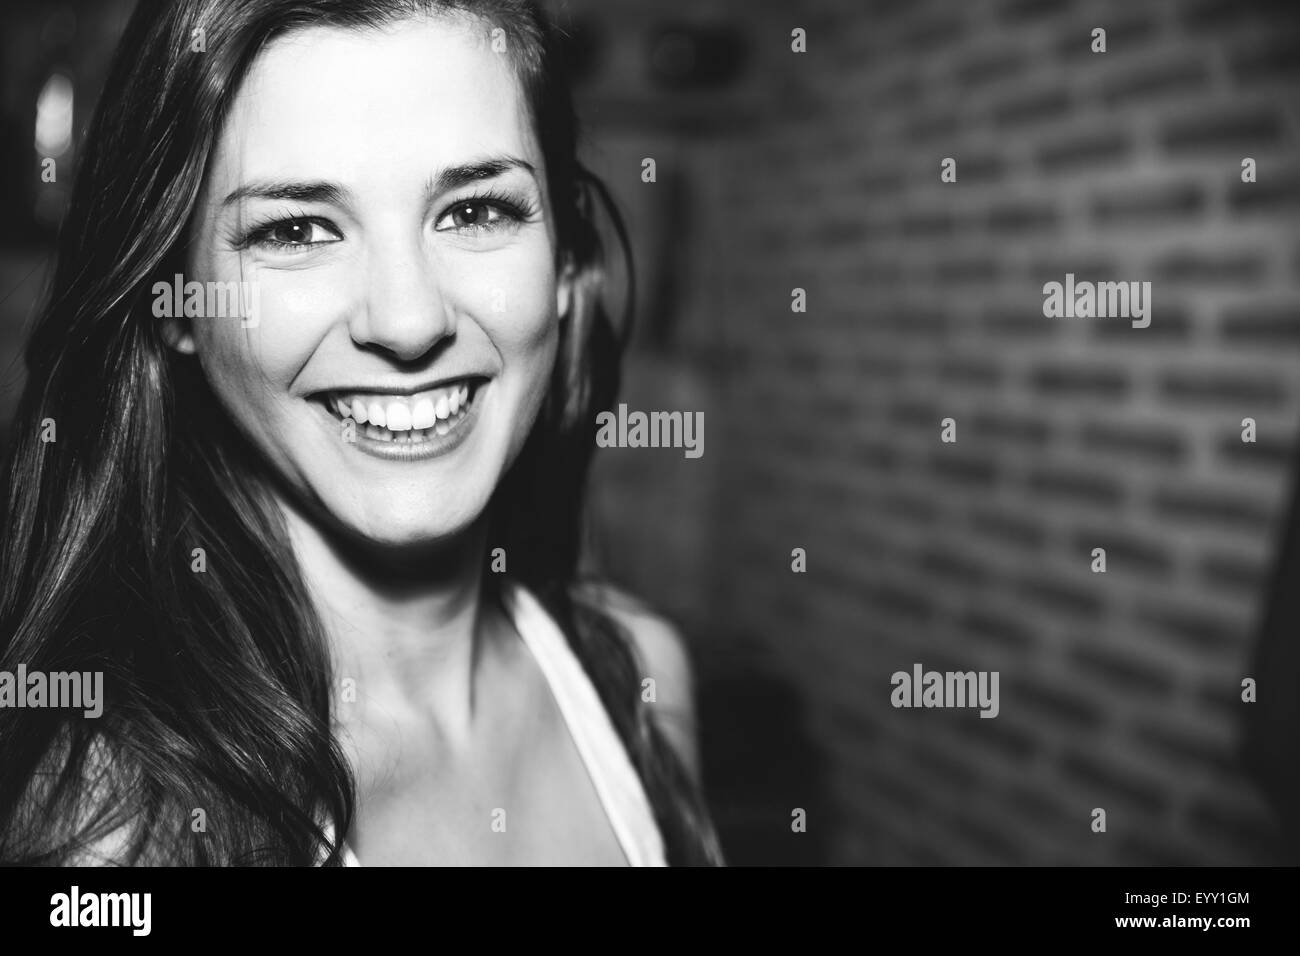 Smiling Caucasian woman laughing in nightclub Banque D'Images